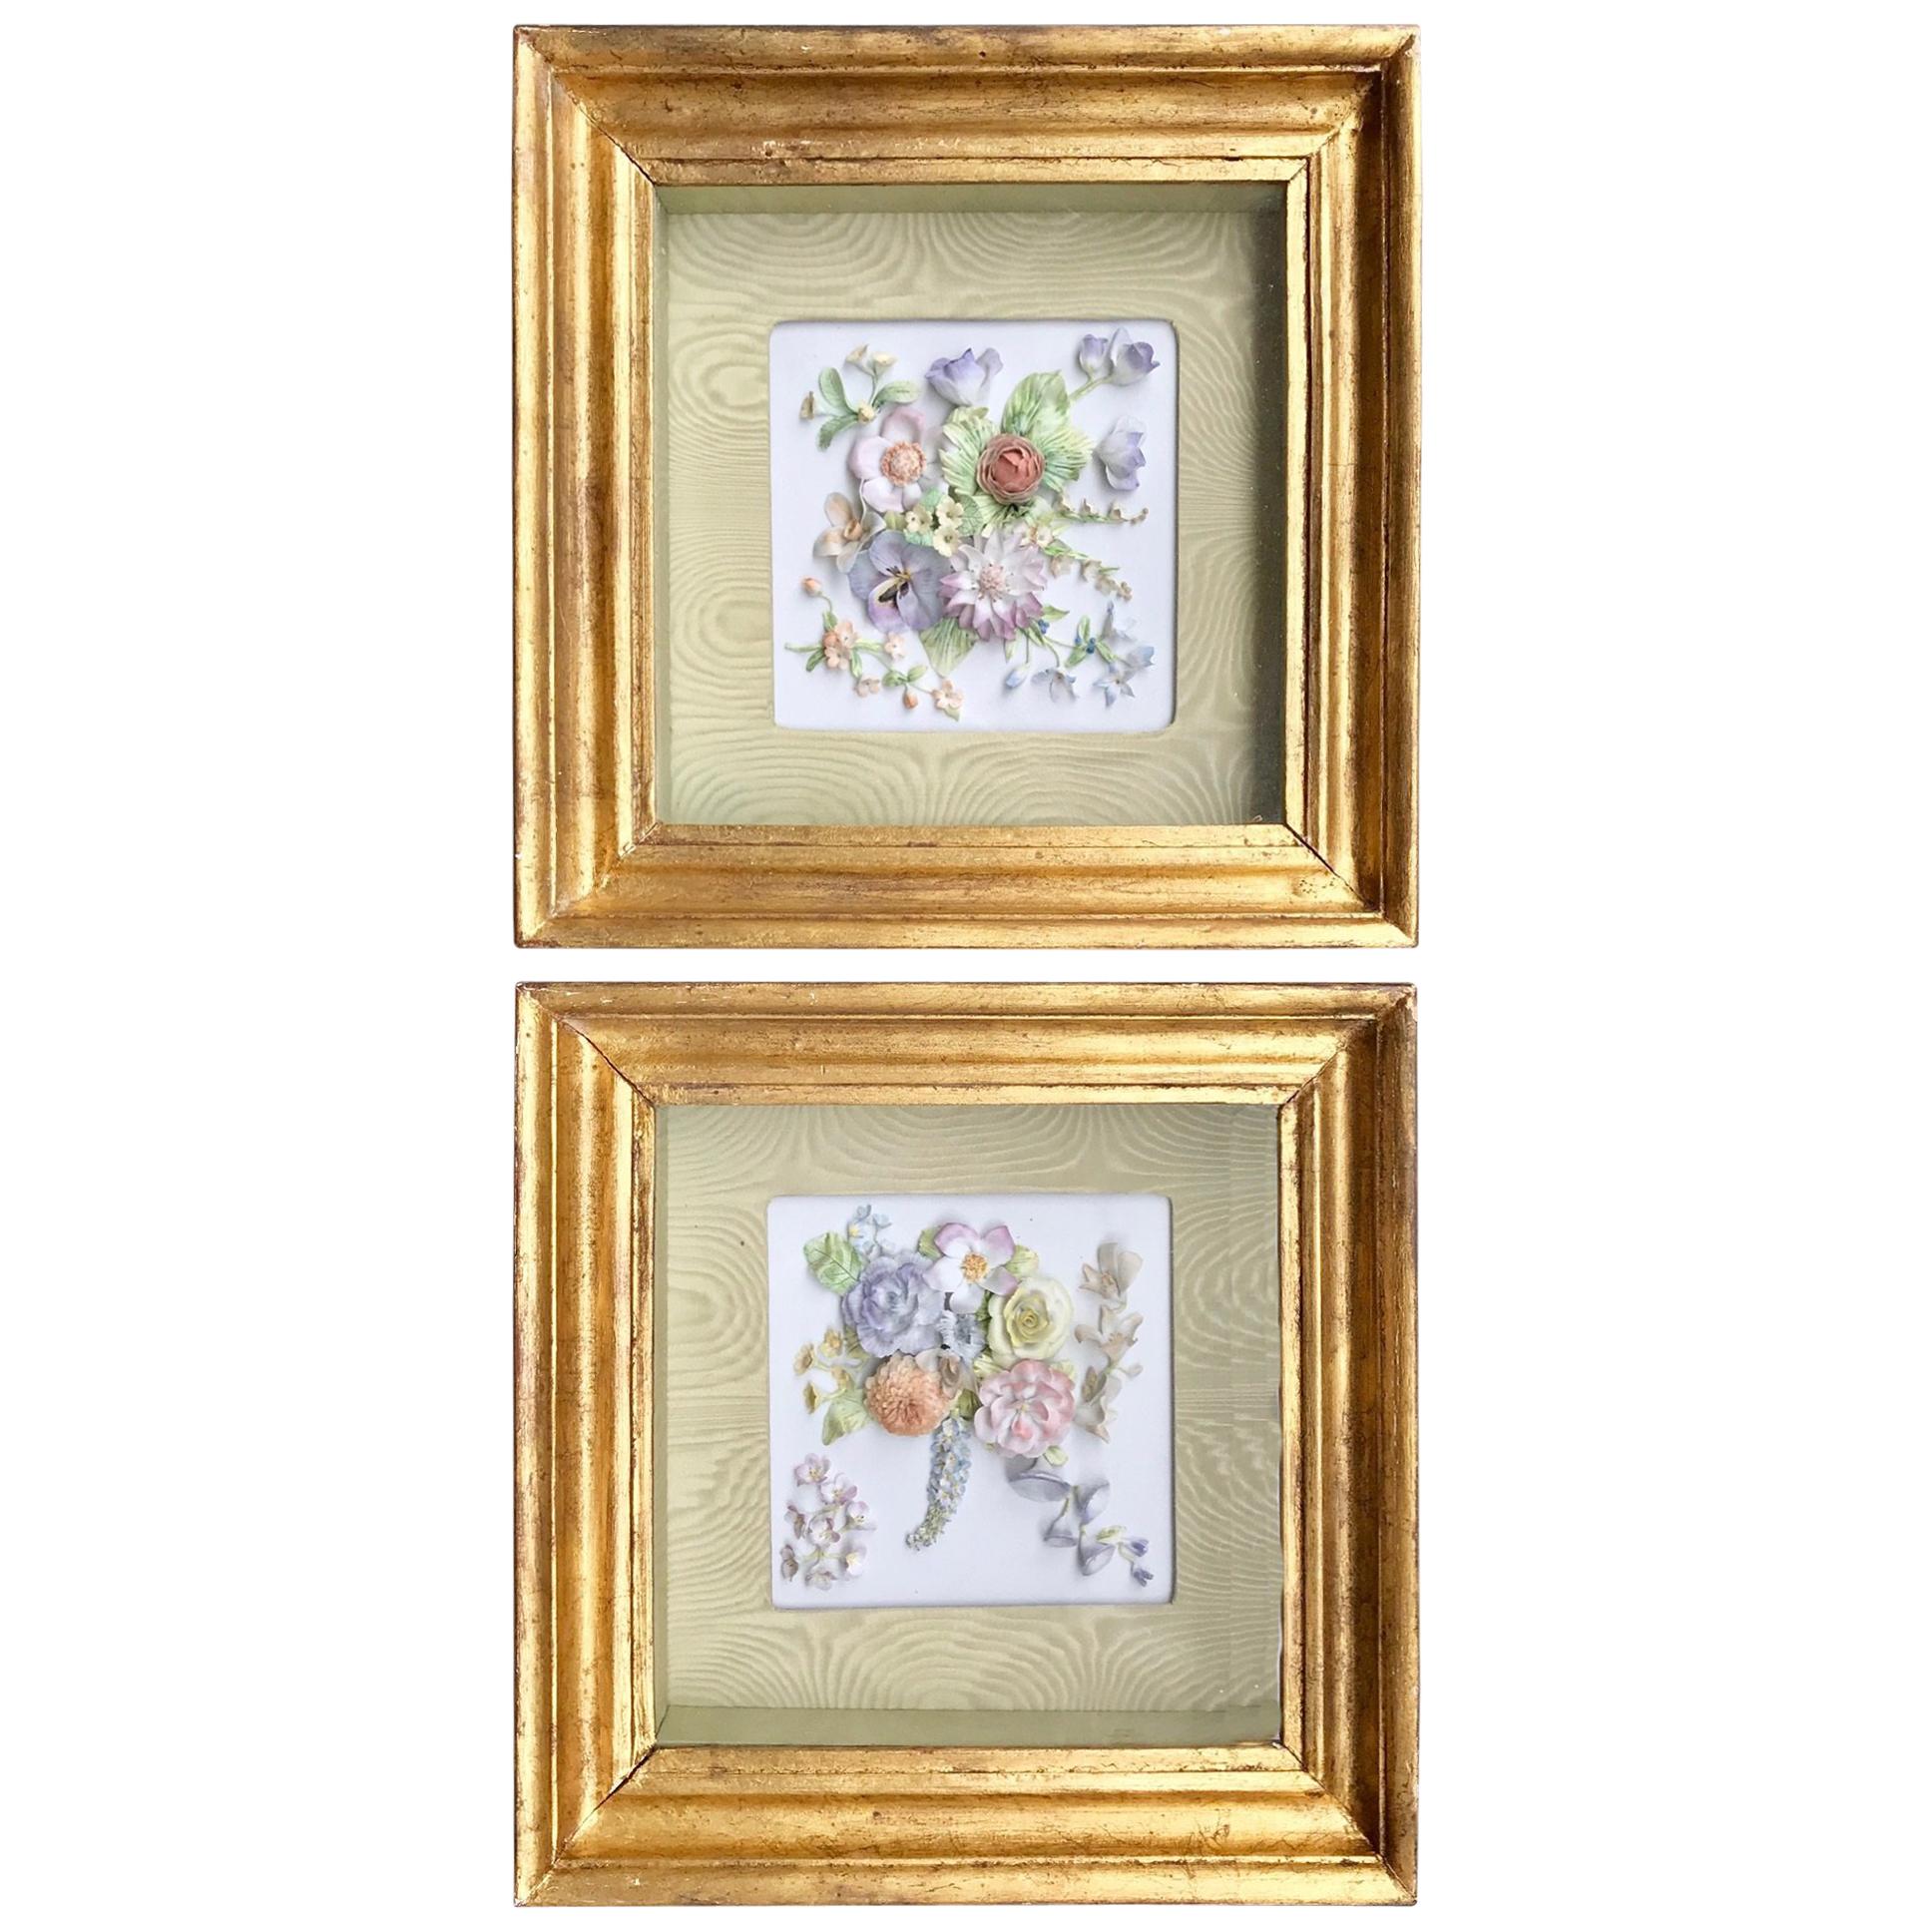 Pair of 19th Century Bisque German Porcelain Floral Plaques in Shadow Boxes